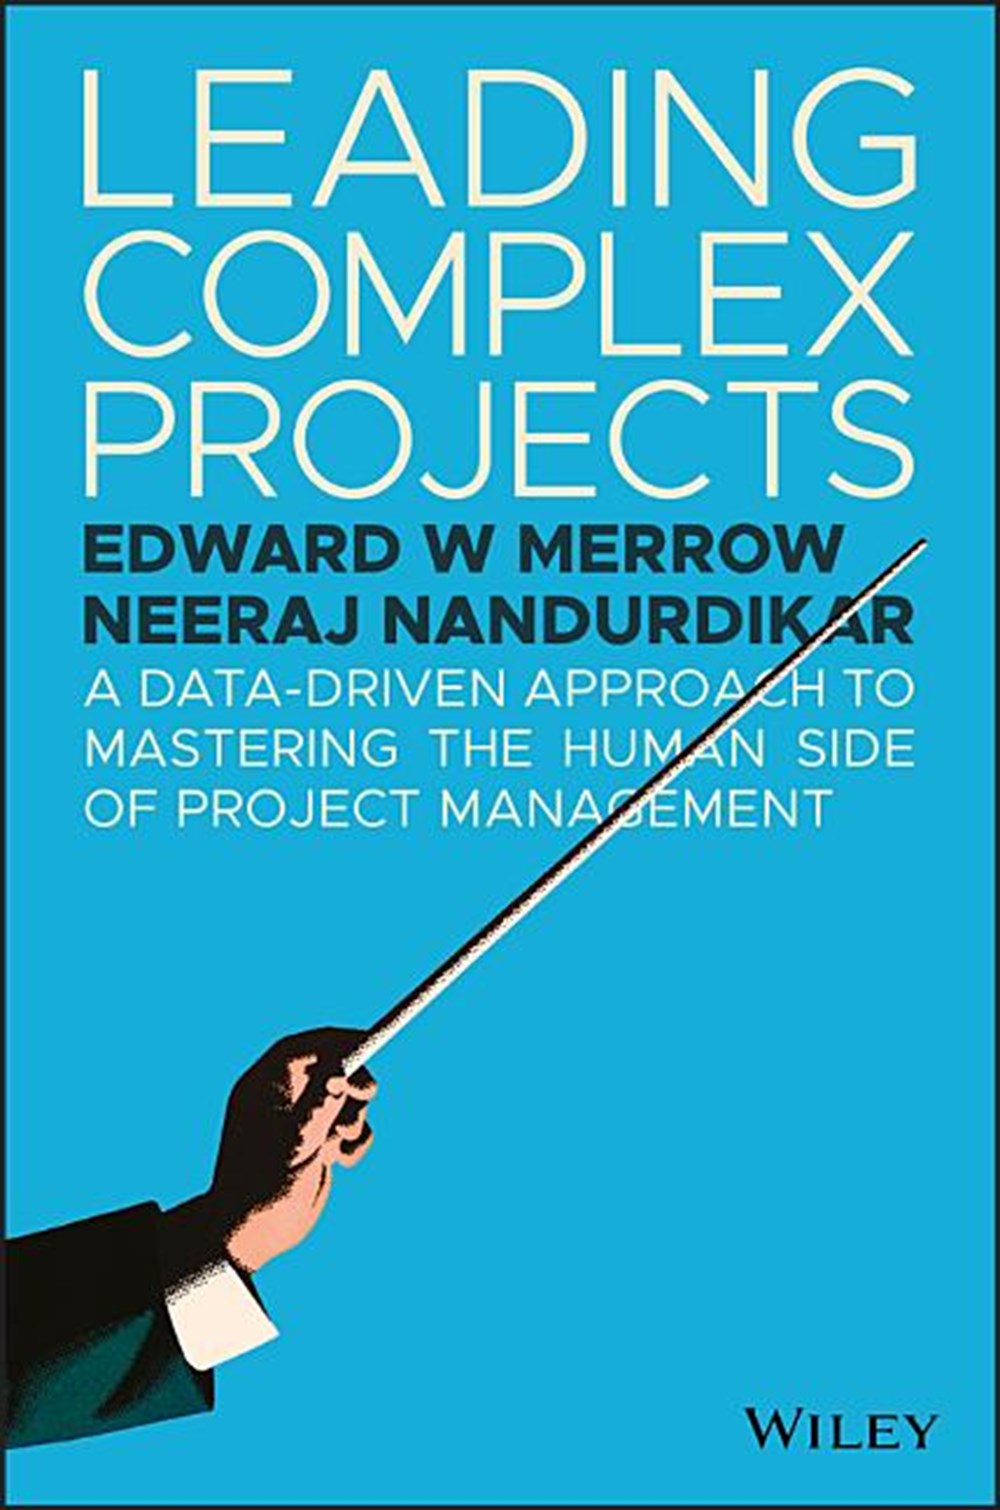 Leading Complex Projects A Data-Driven Approach to Mastering the Human Side of Project Management